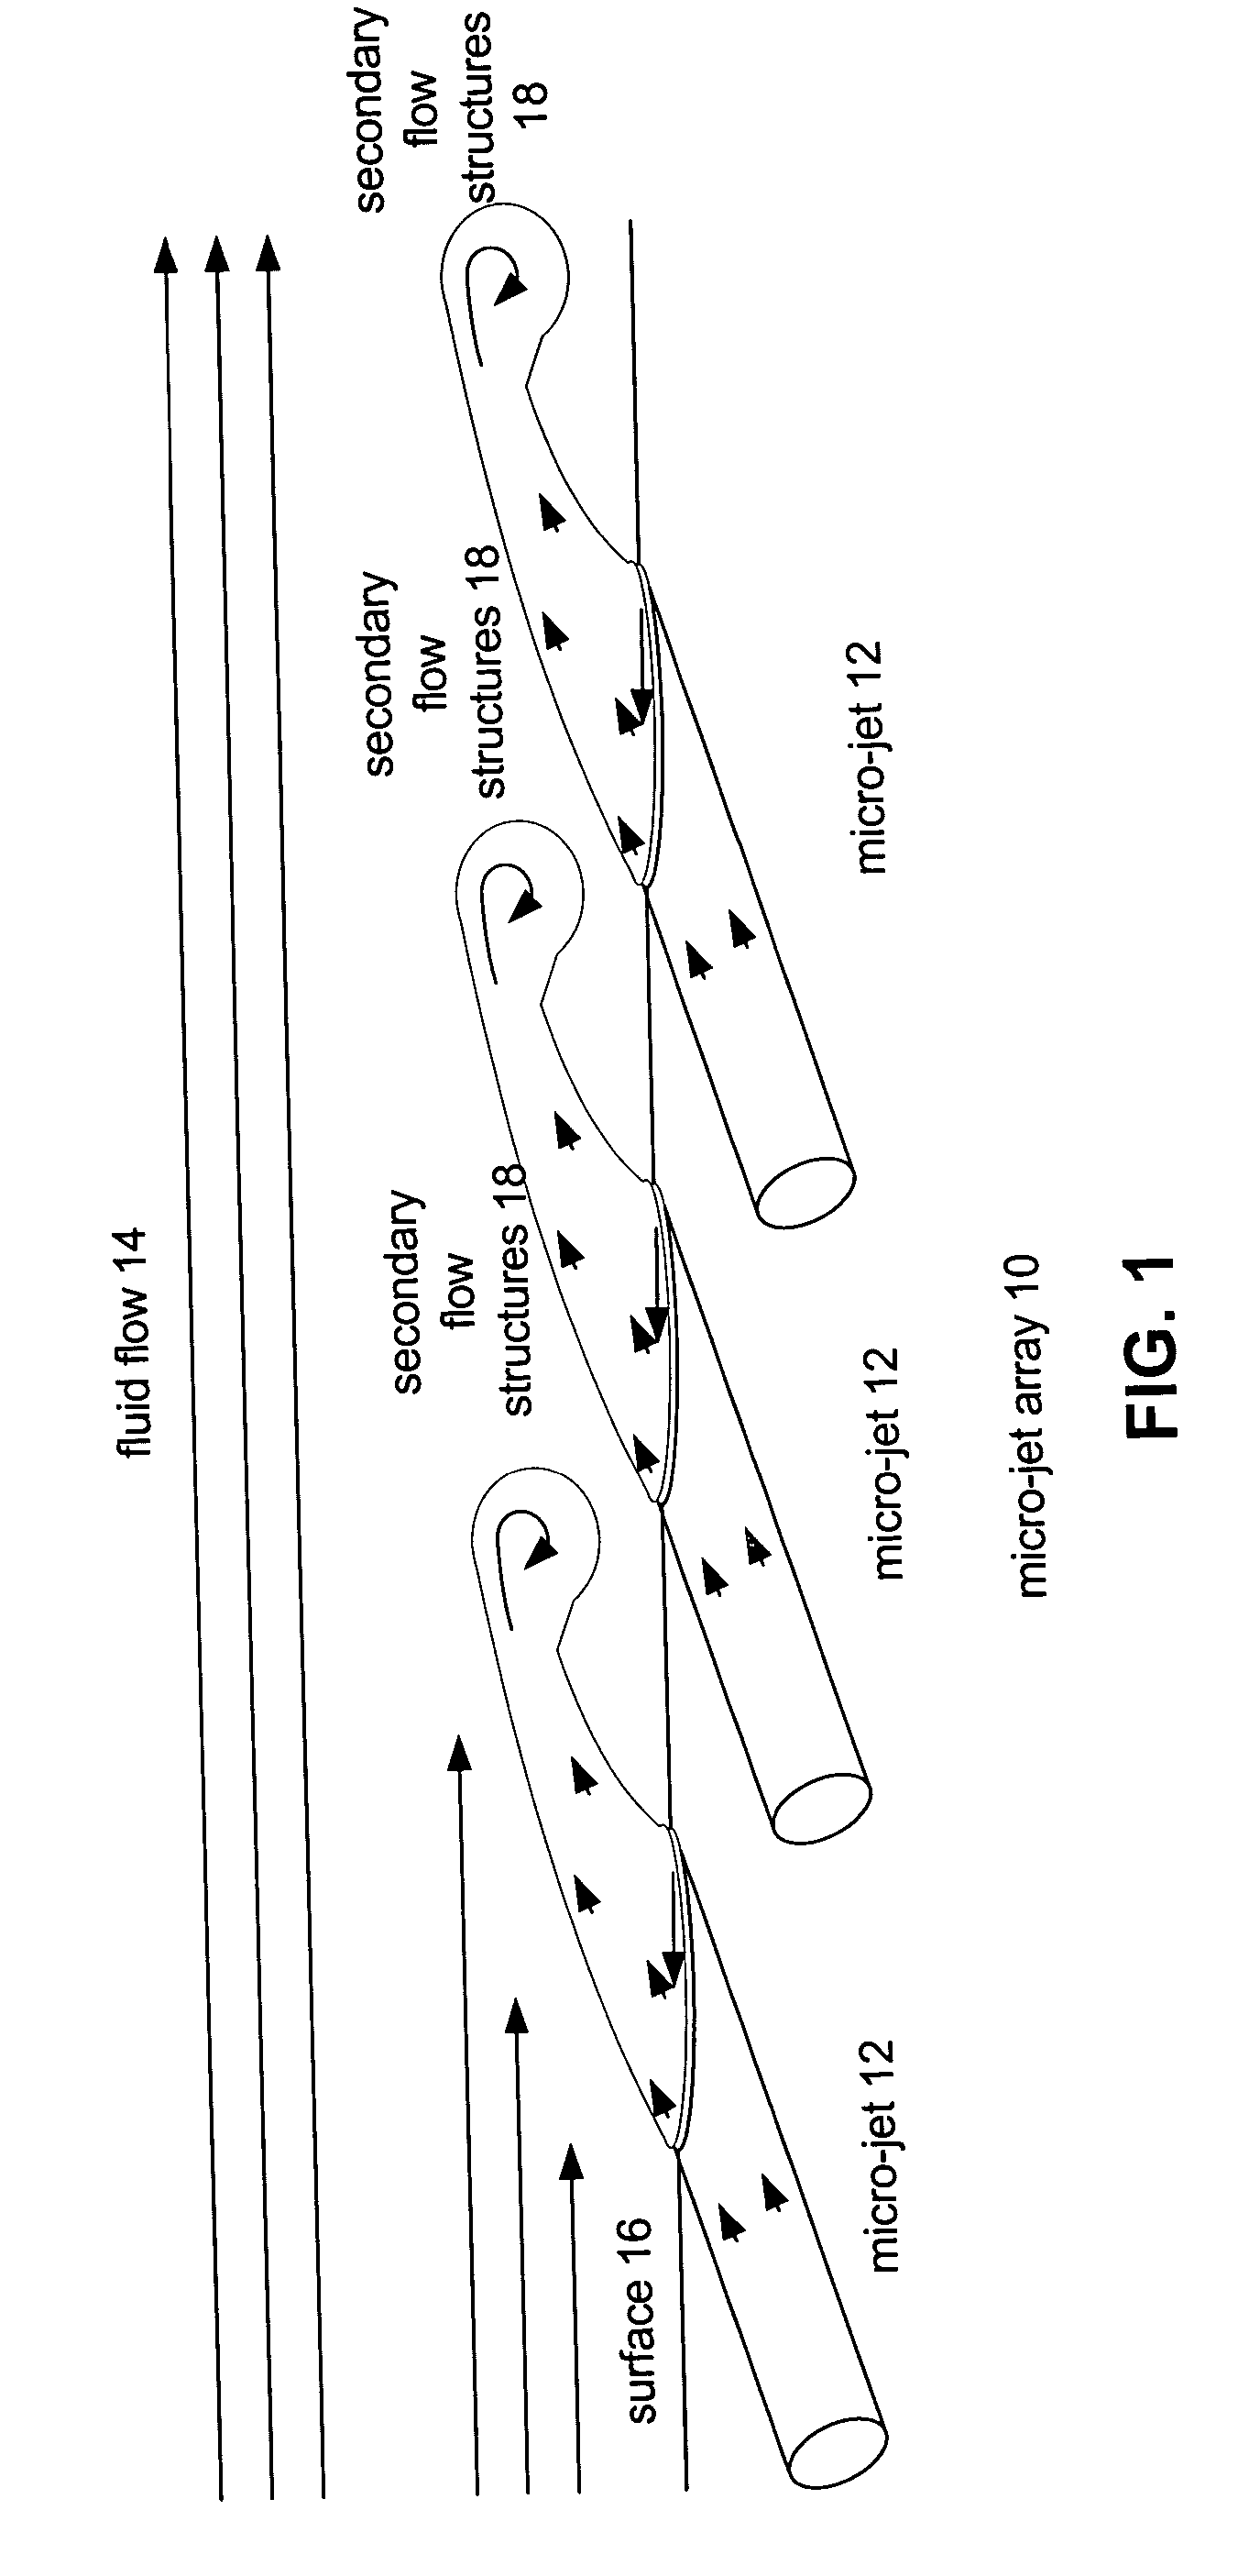 System and method to control flowfield vortices with micro-jet arrays